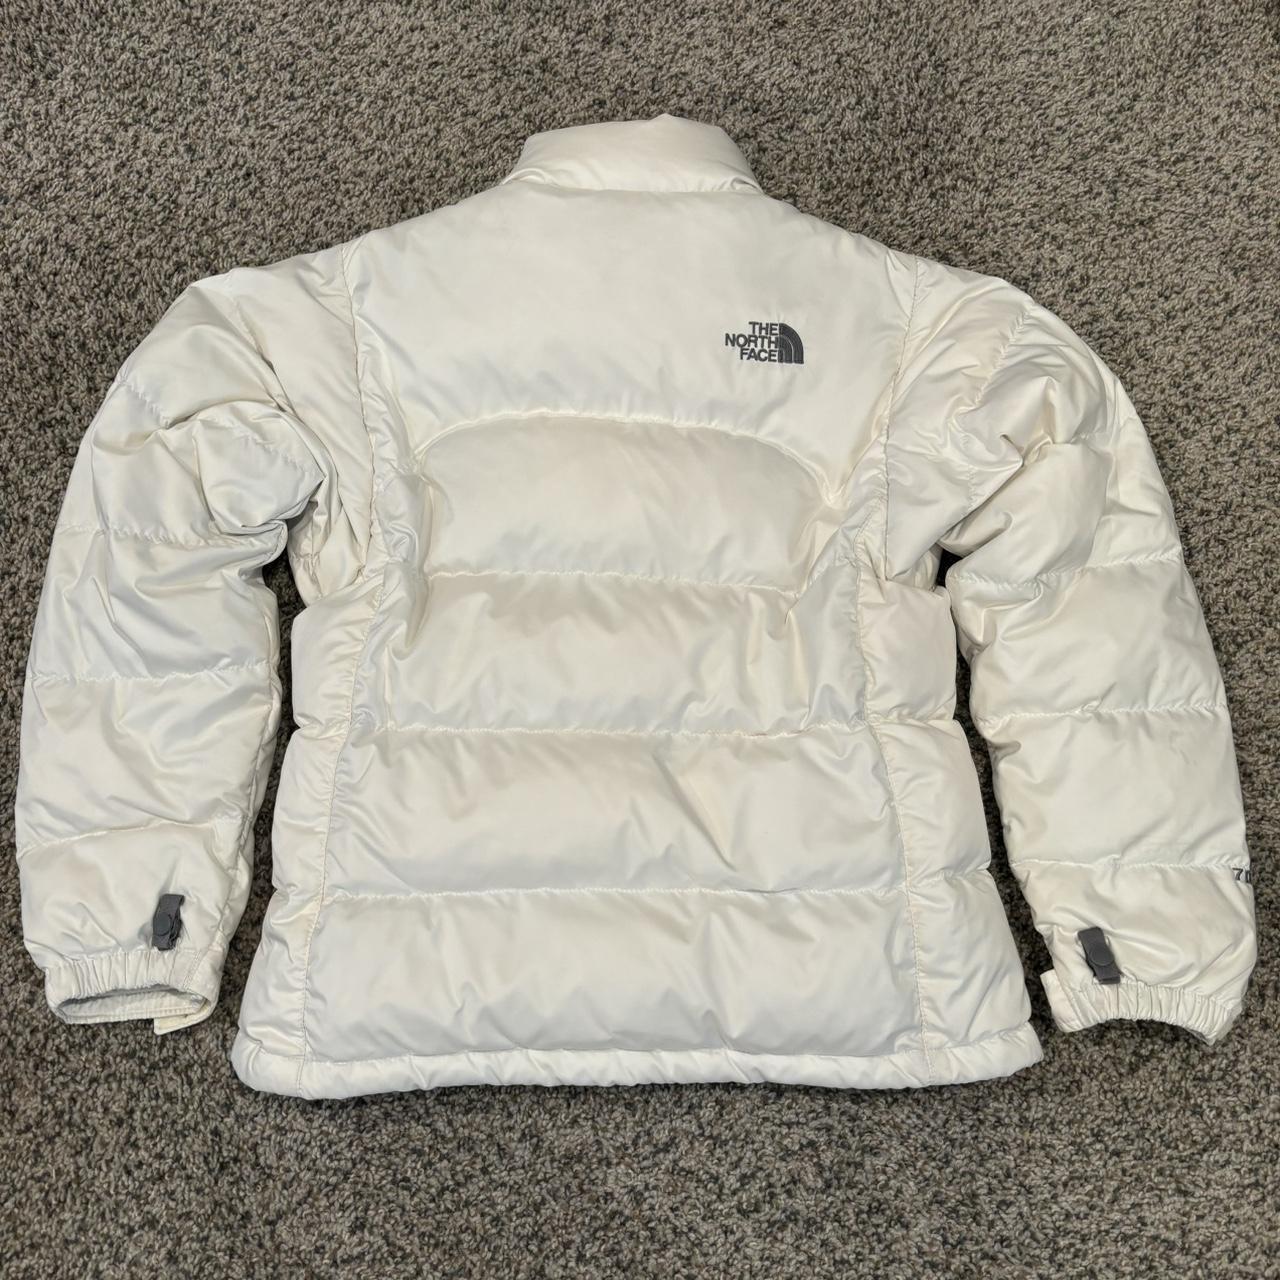 North Face Puffer 700 in White ️ Message me before... - Depop